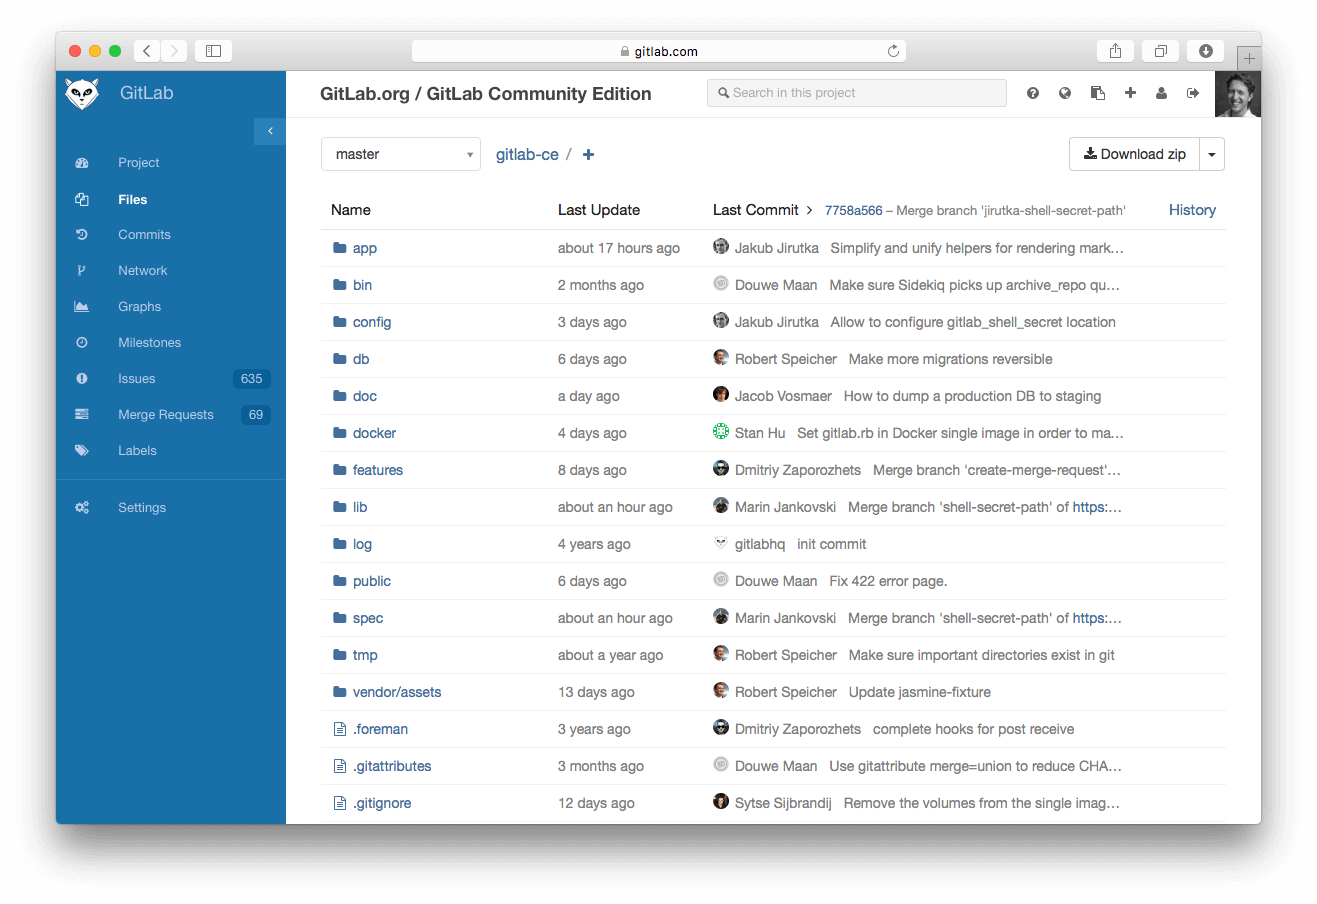 The new sidebar in GitLab 7.11